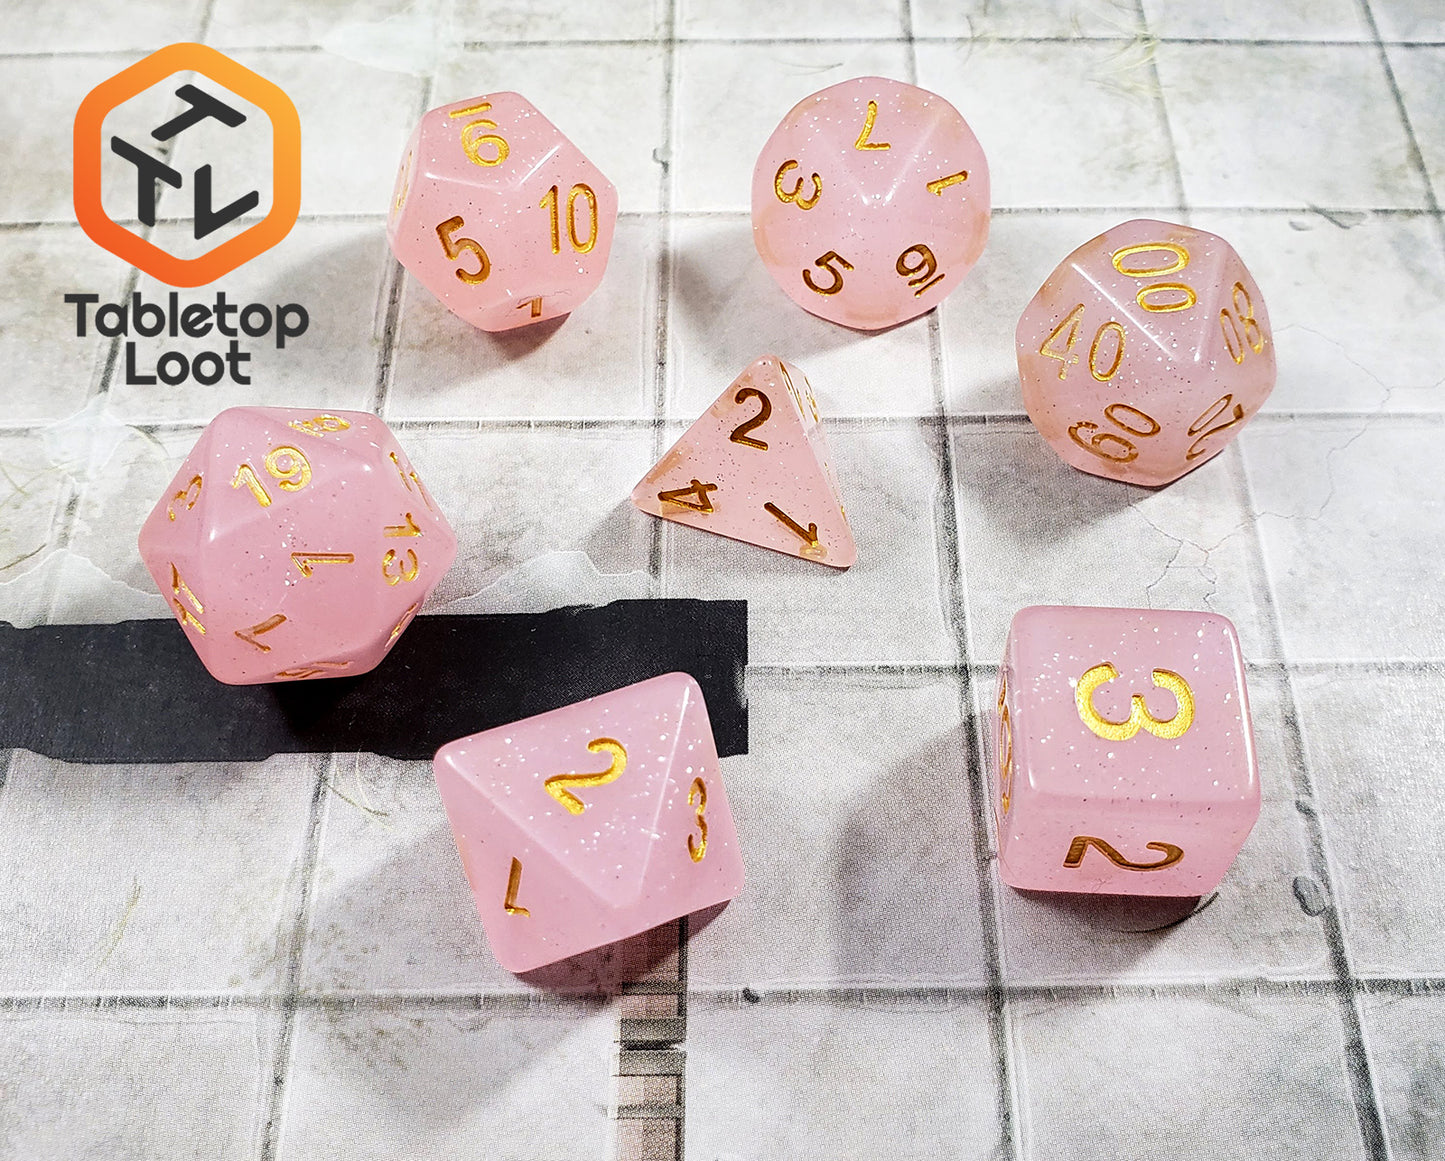 The Frosted Raspberry 7 piece dice set from Tabletop Loot with pastel pink glittery resin and gold numbering.